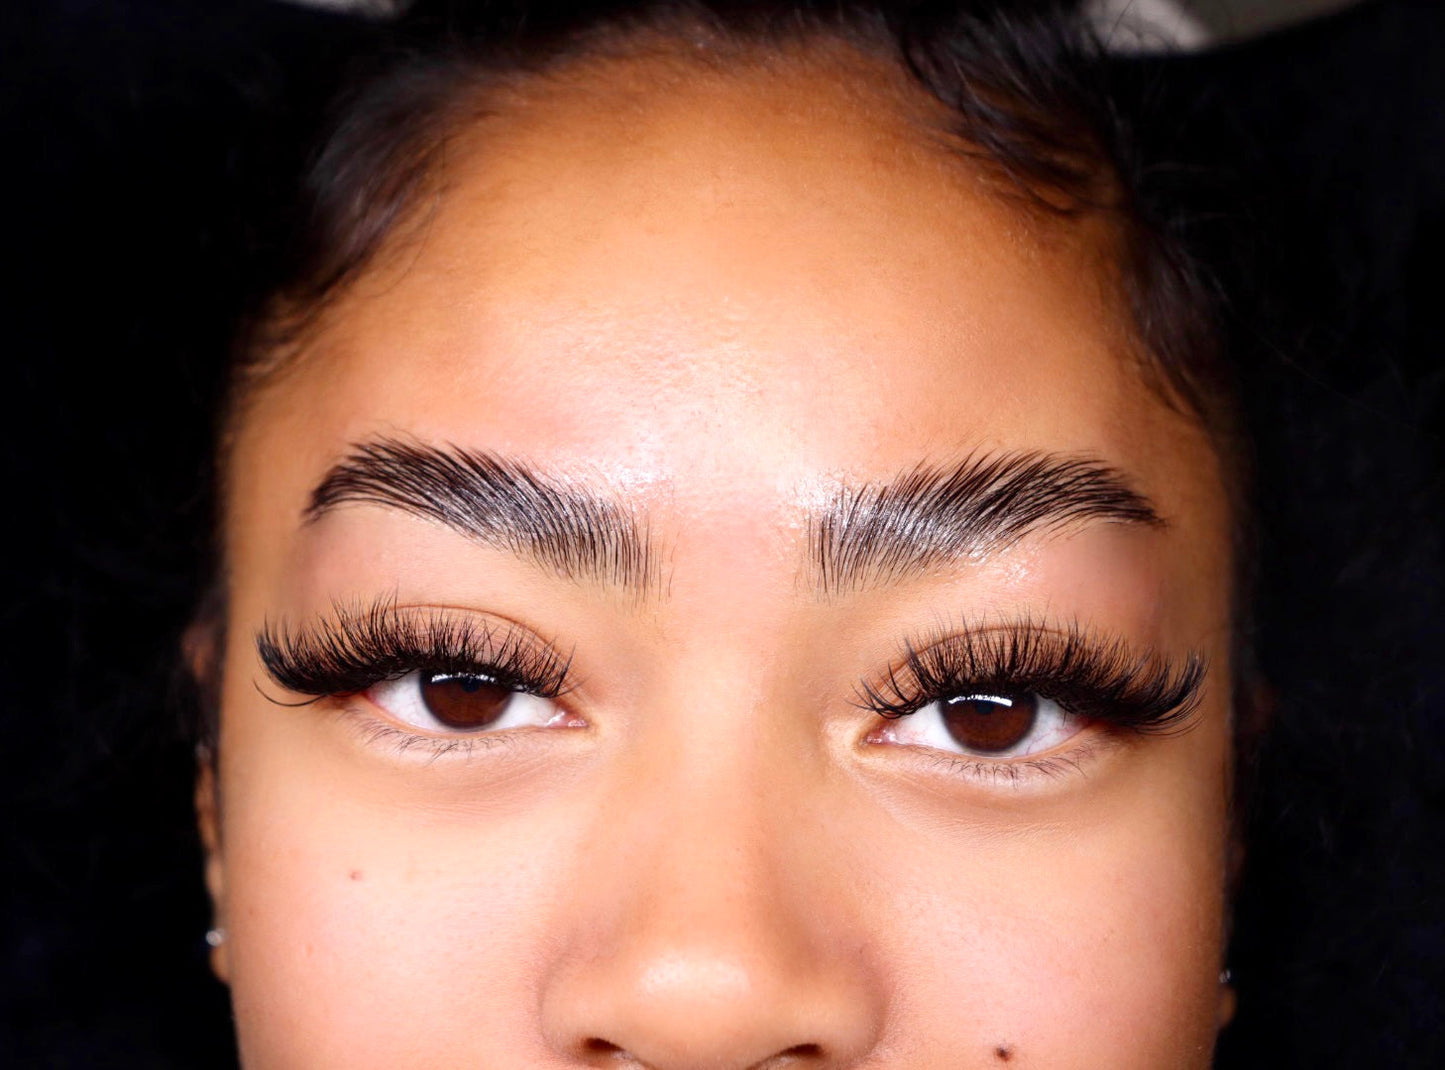 photo of a woman with big eyelashes and wide eyebrows